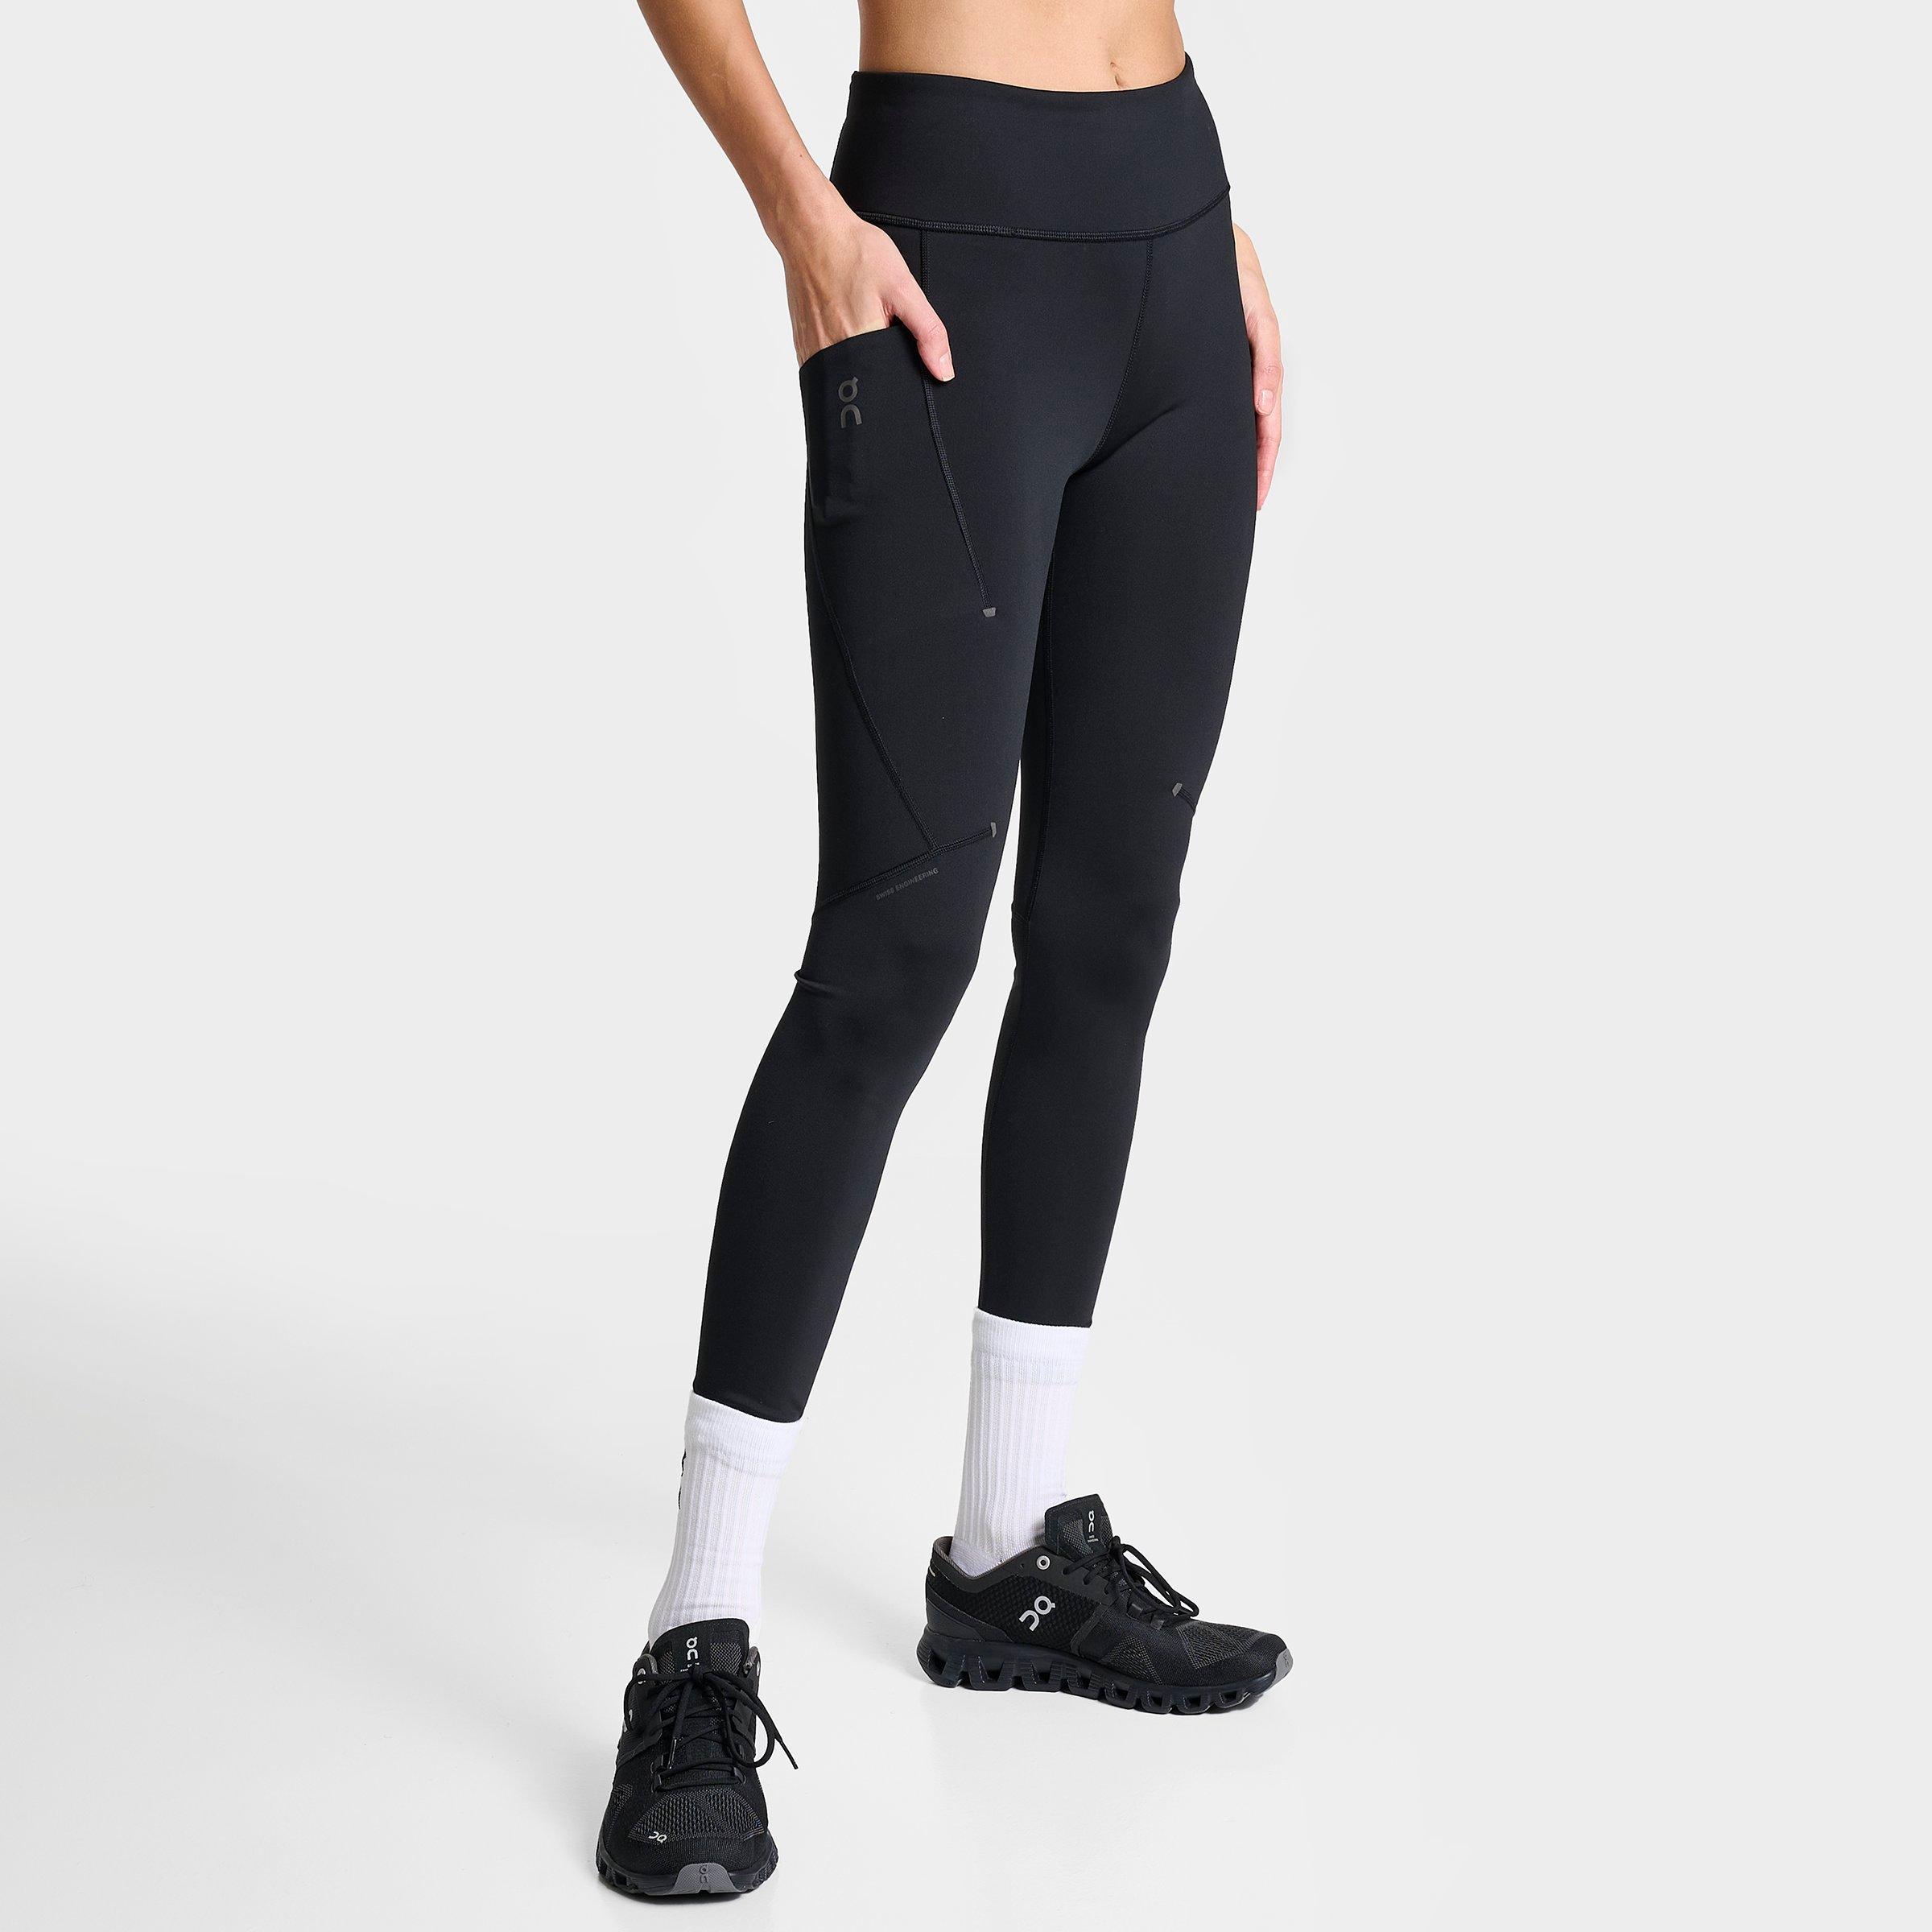 Shop JD Sports Womens Gym Leggings up to 90% Off